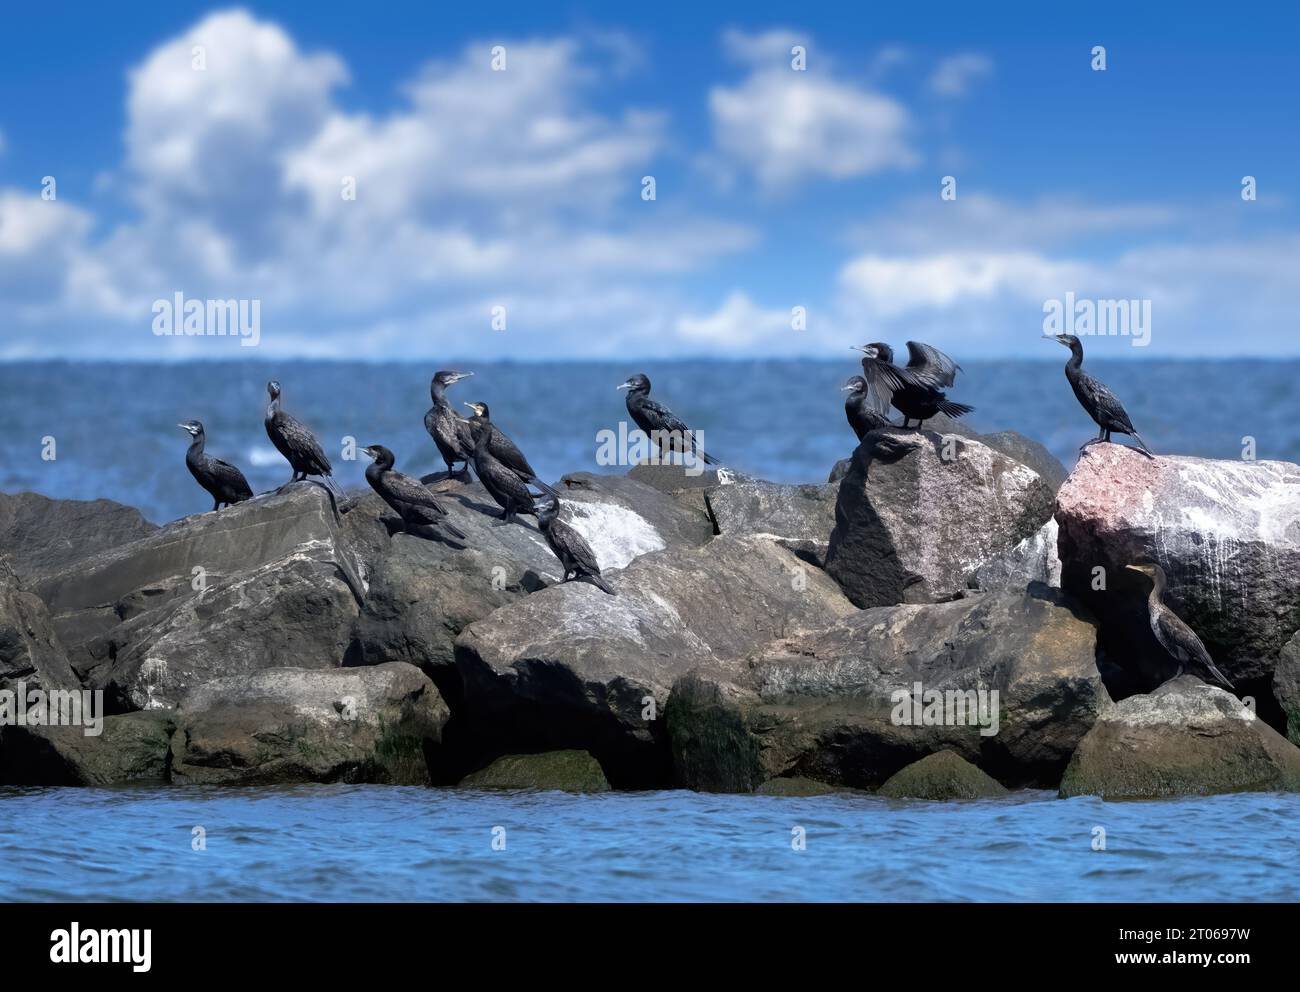 Group of cormorants (Phalacrocorax carbo) sitting on large stones of a protective wall in the sea Stock Photo